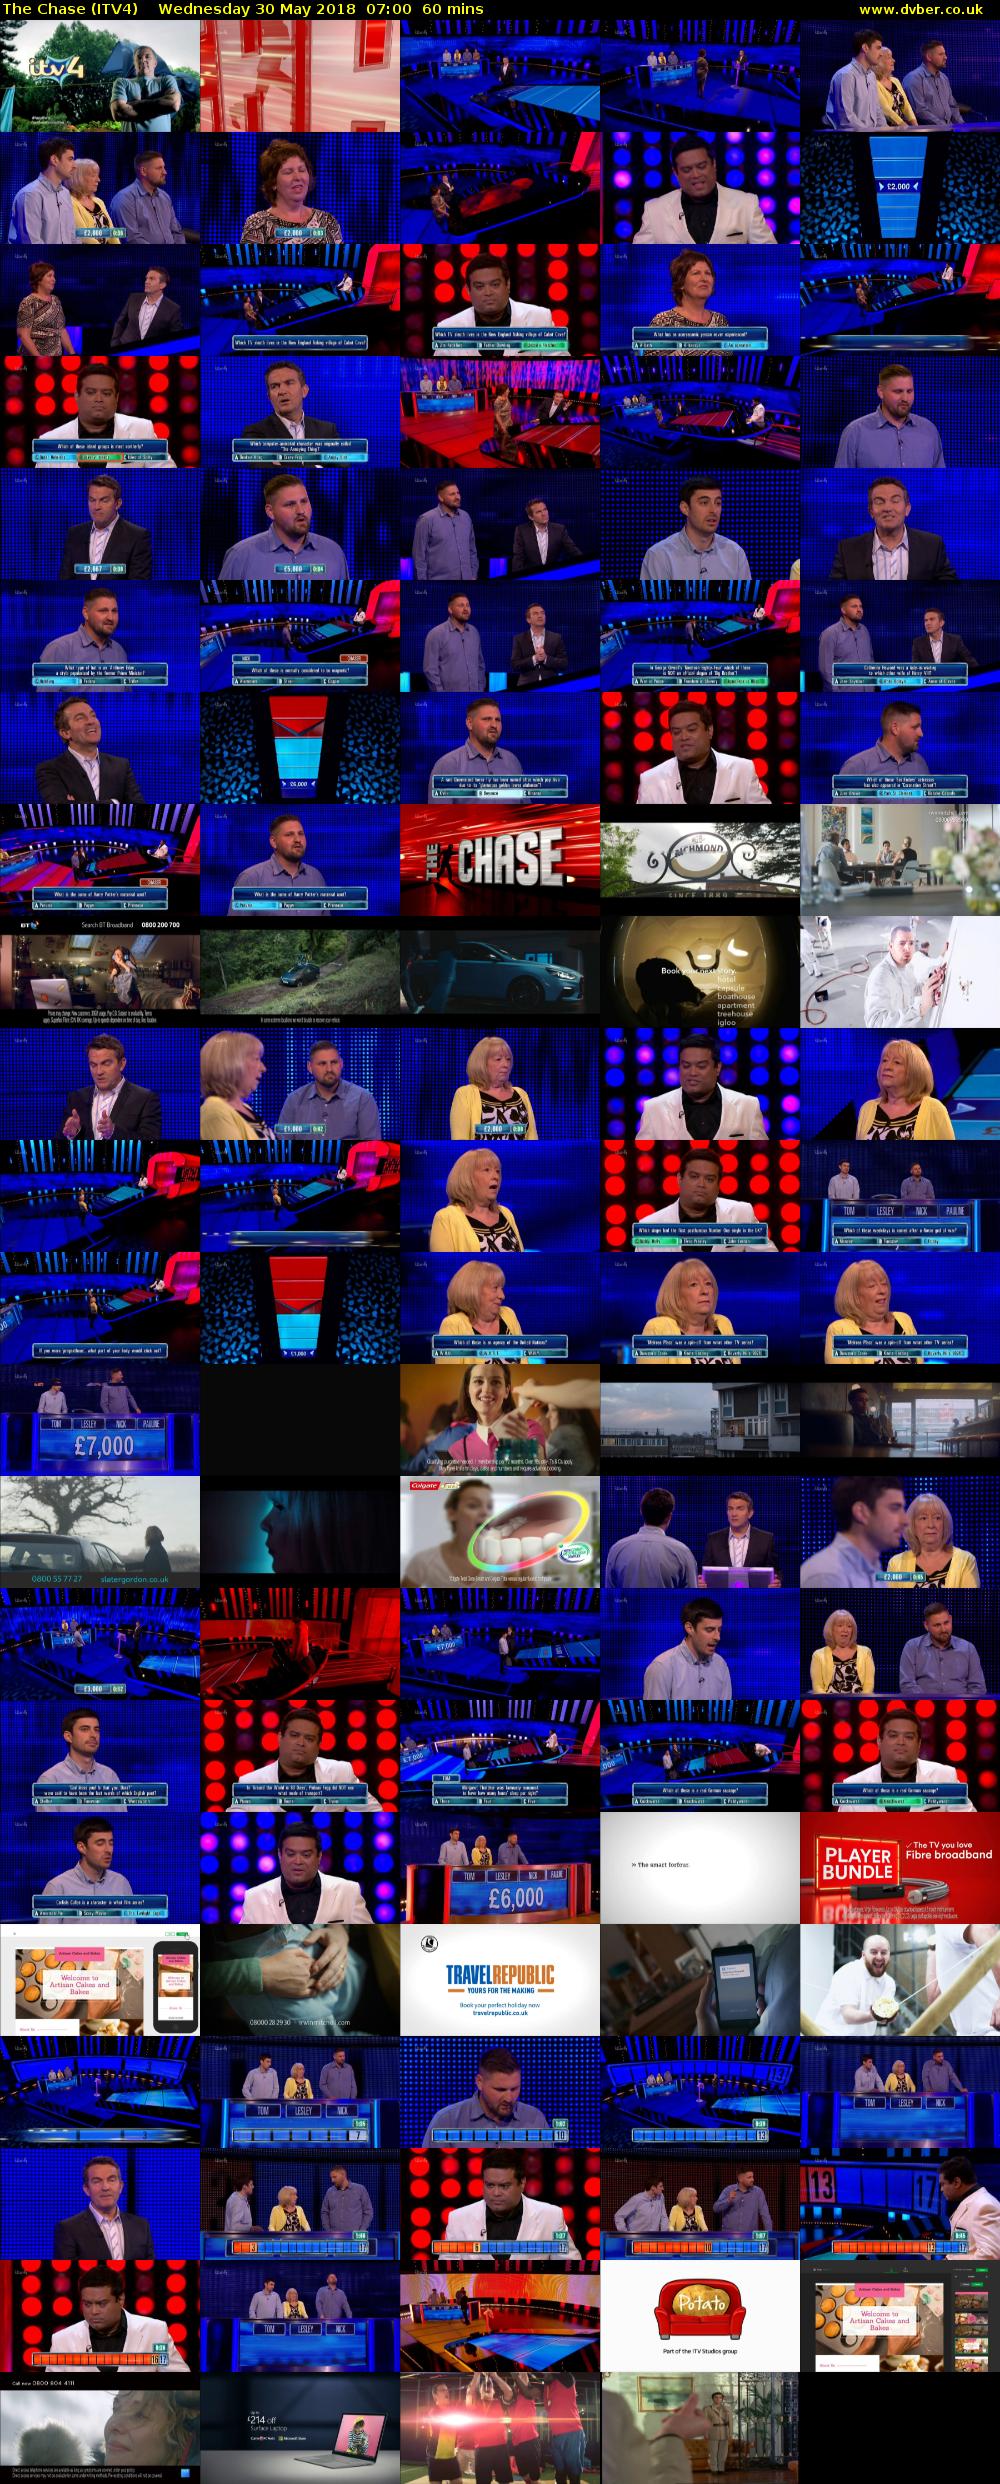 The Chase (ITV4) Wednesday 30 May 2018 07:00 - 08:00